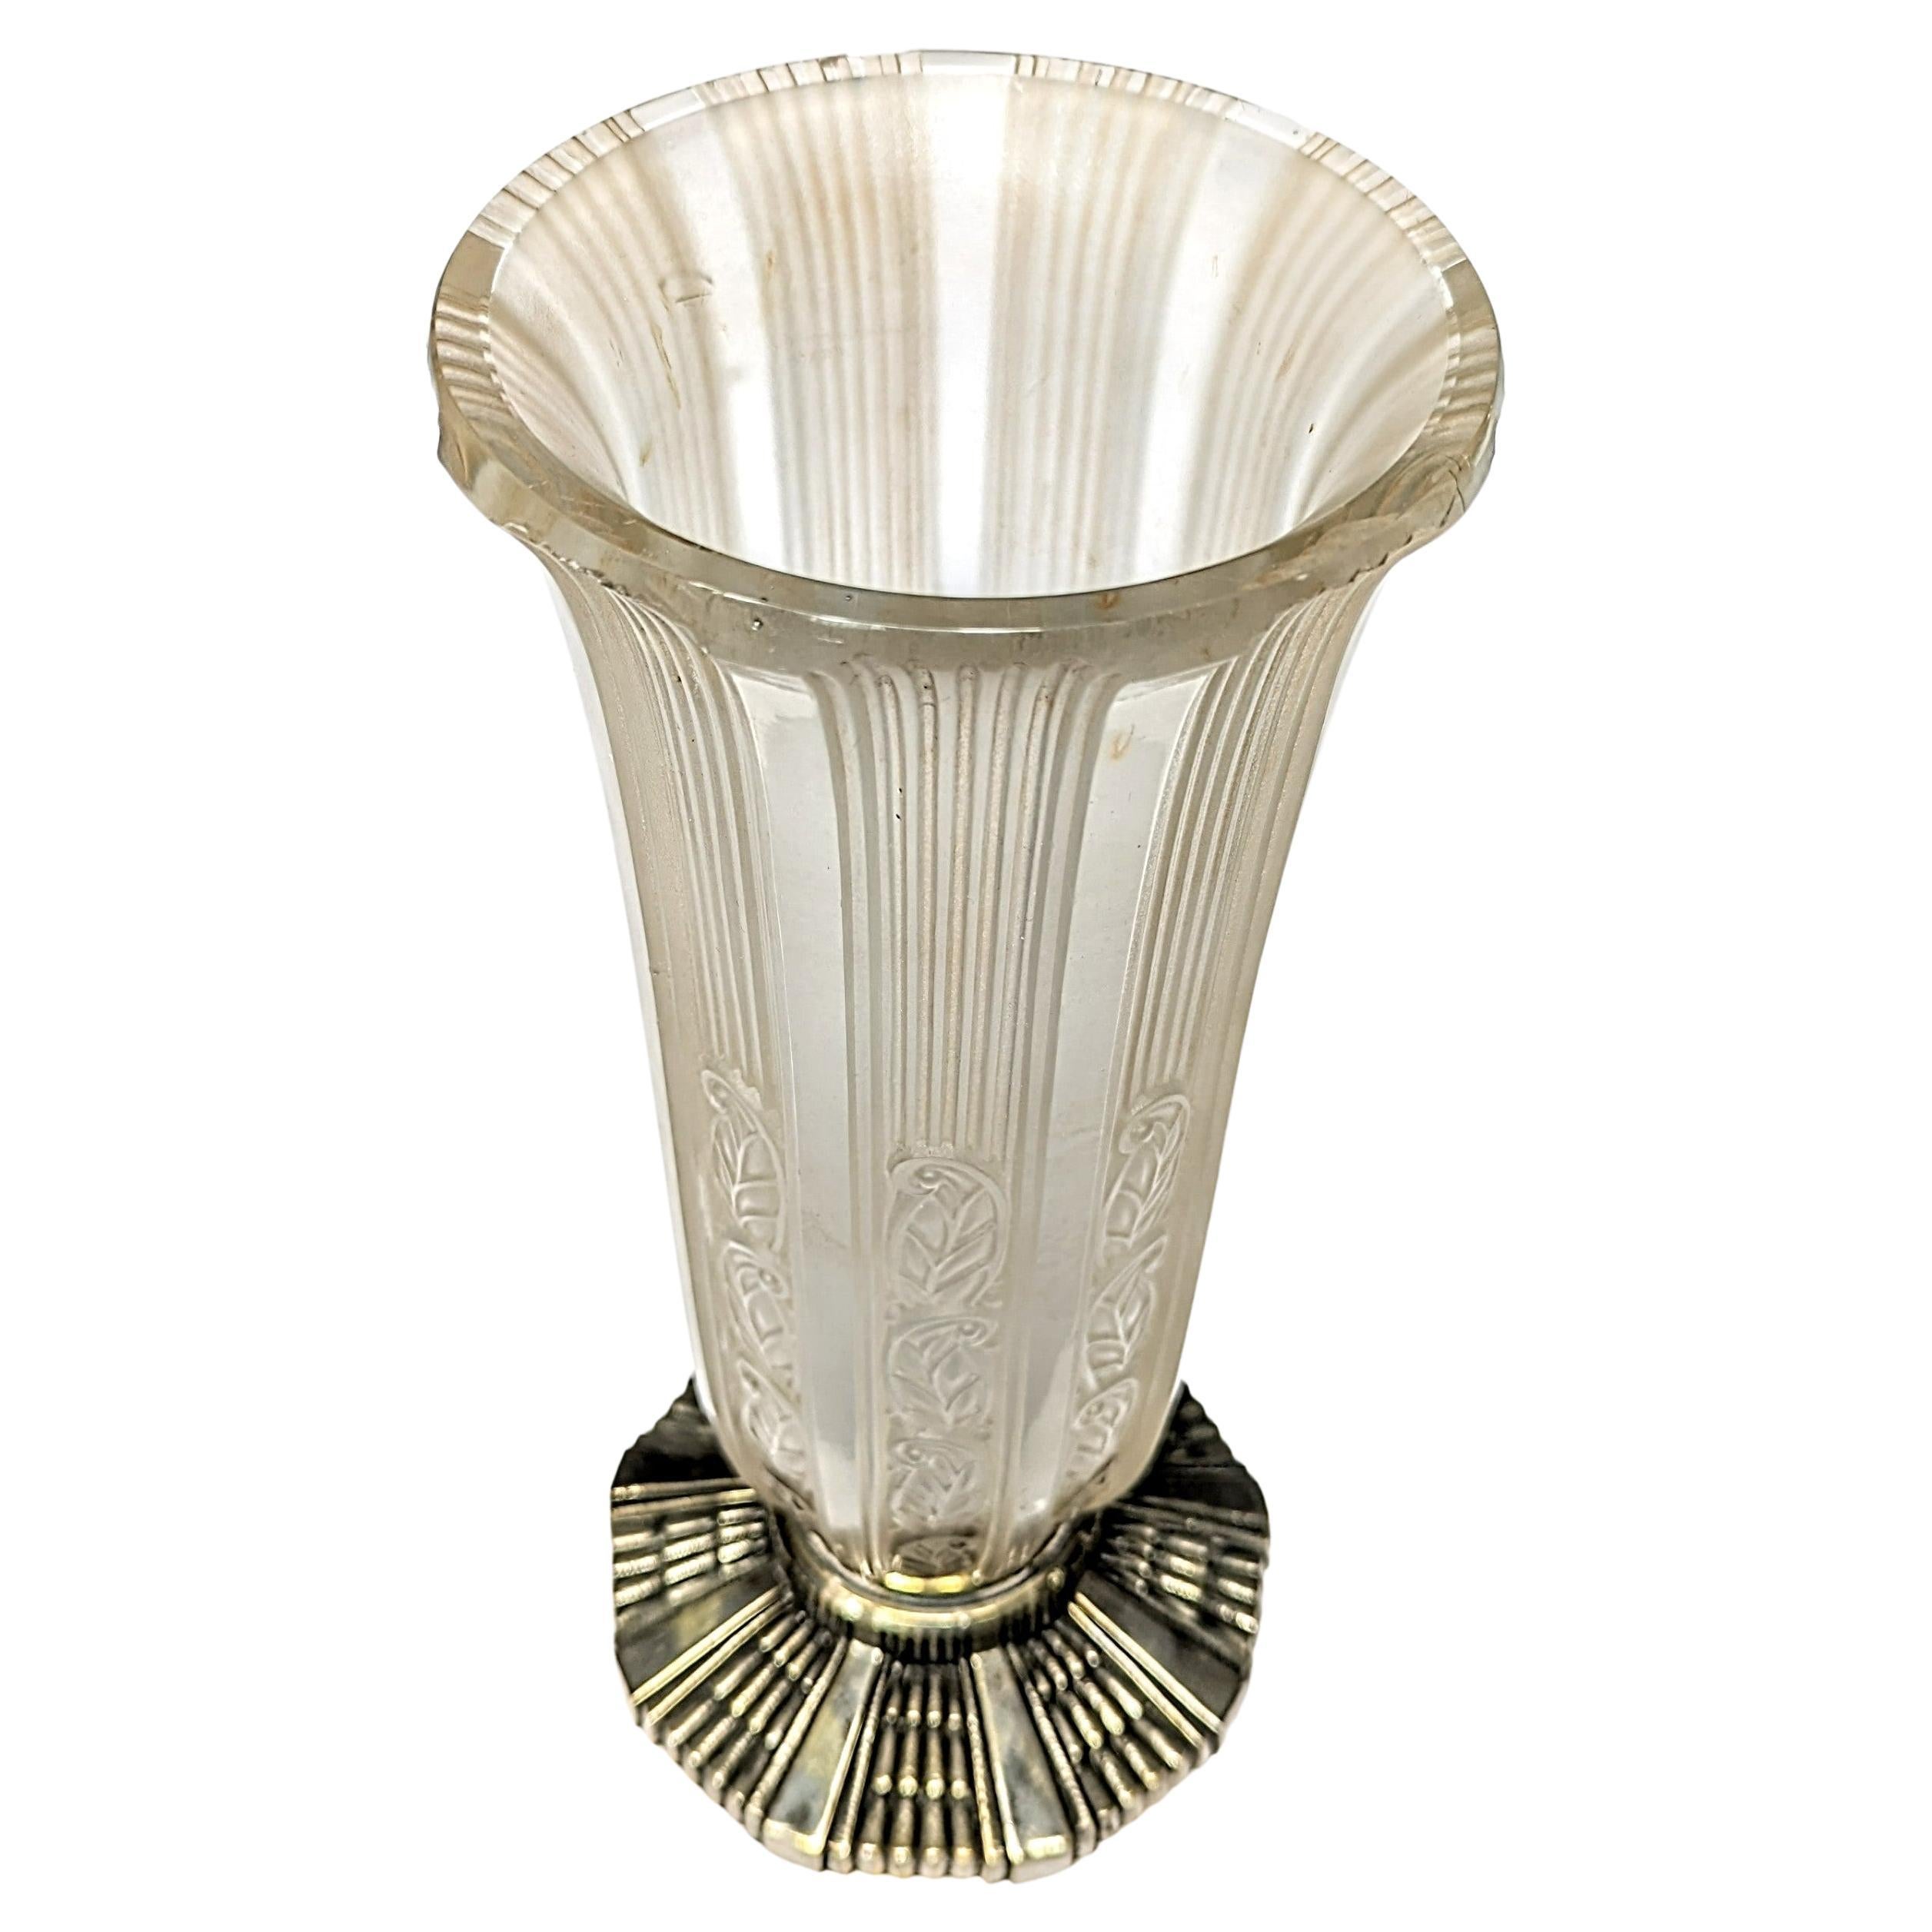 Stunning French Art Deco glass vase with flower motif throughout with decorative bronze base by Hettier and Vincent in great condition. Complimentary drop-off to the tri-state area. We are the rare source that has specialized exclusively in French